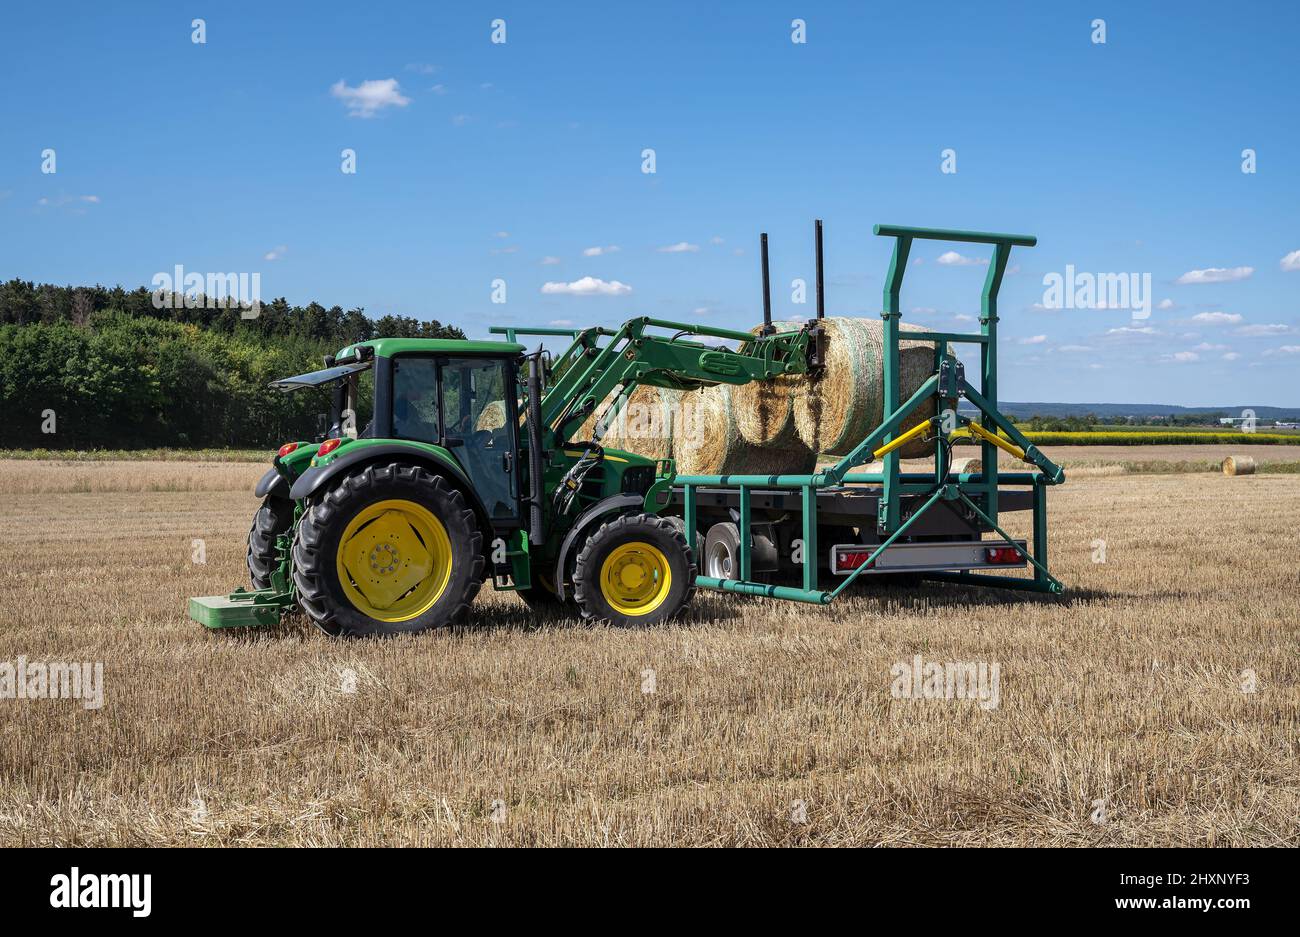 Tractor loads bales of straw onto a trailer in a stubble field Stock Photo